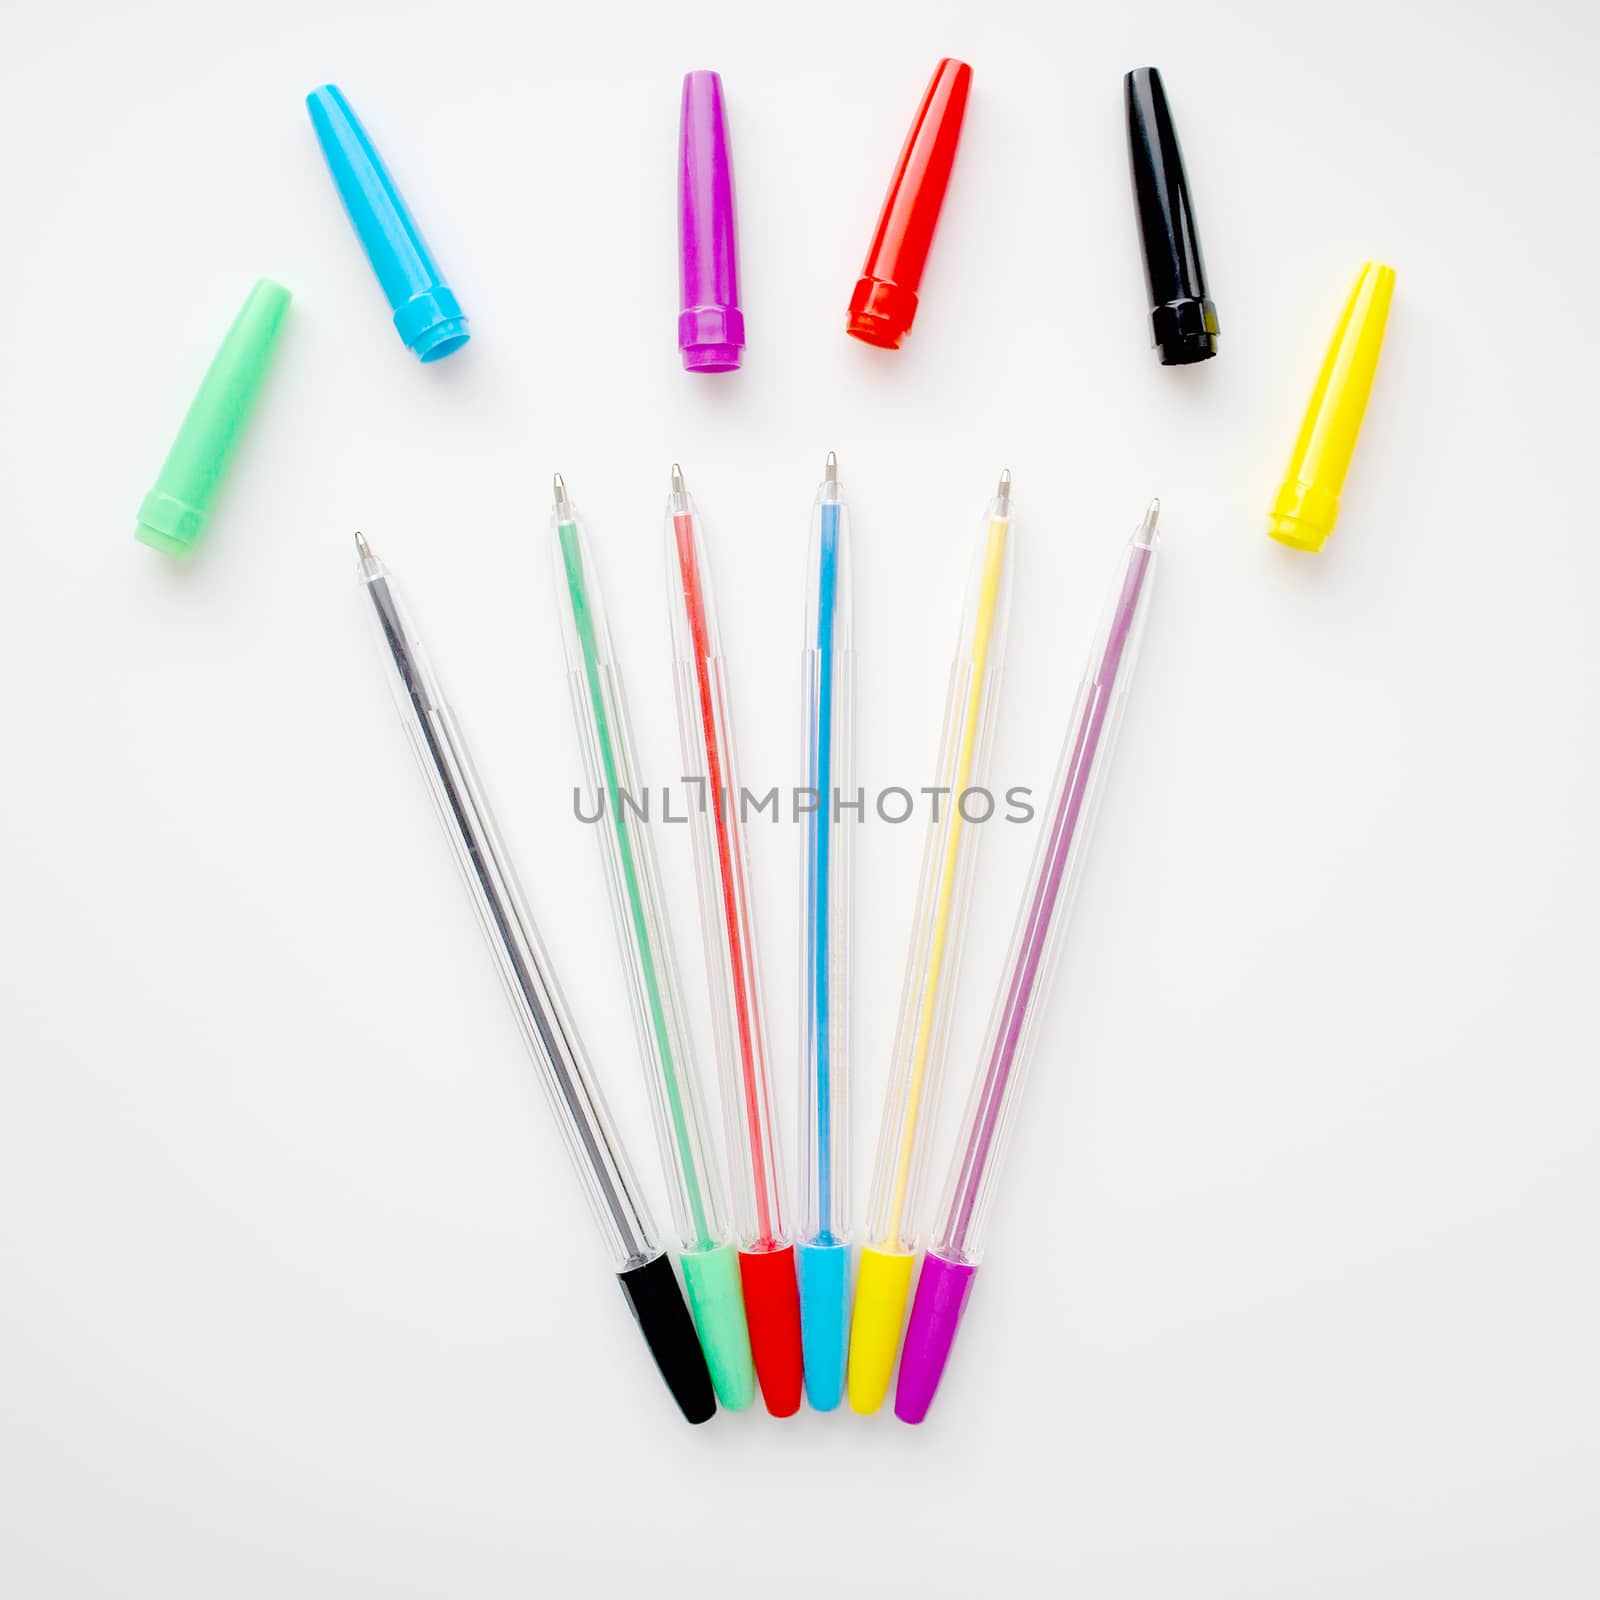 Collection of ball-point pen over white